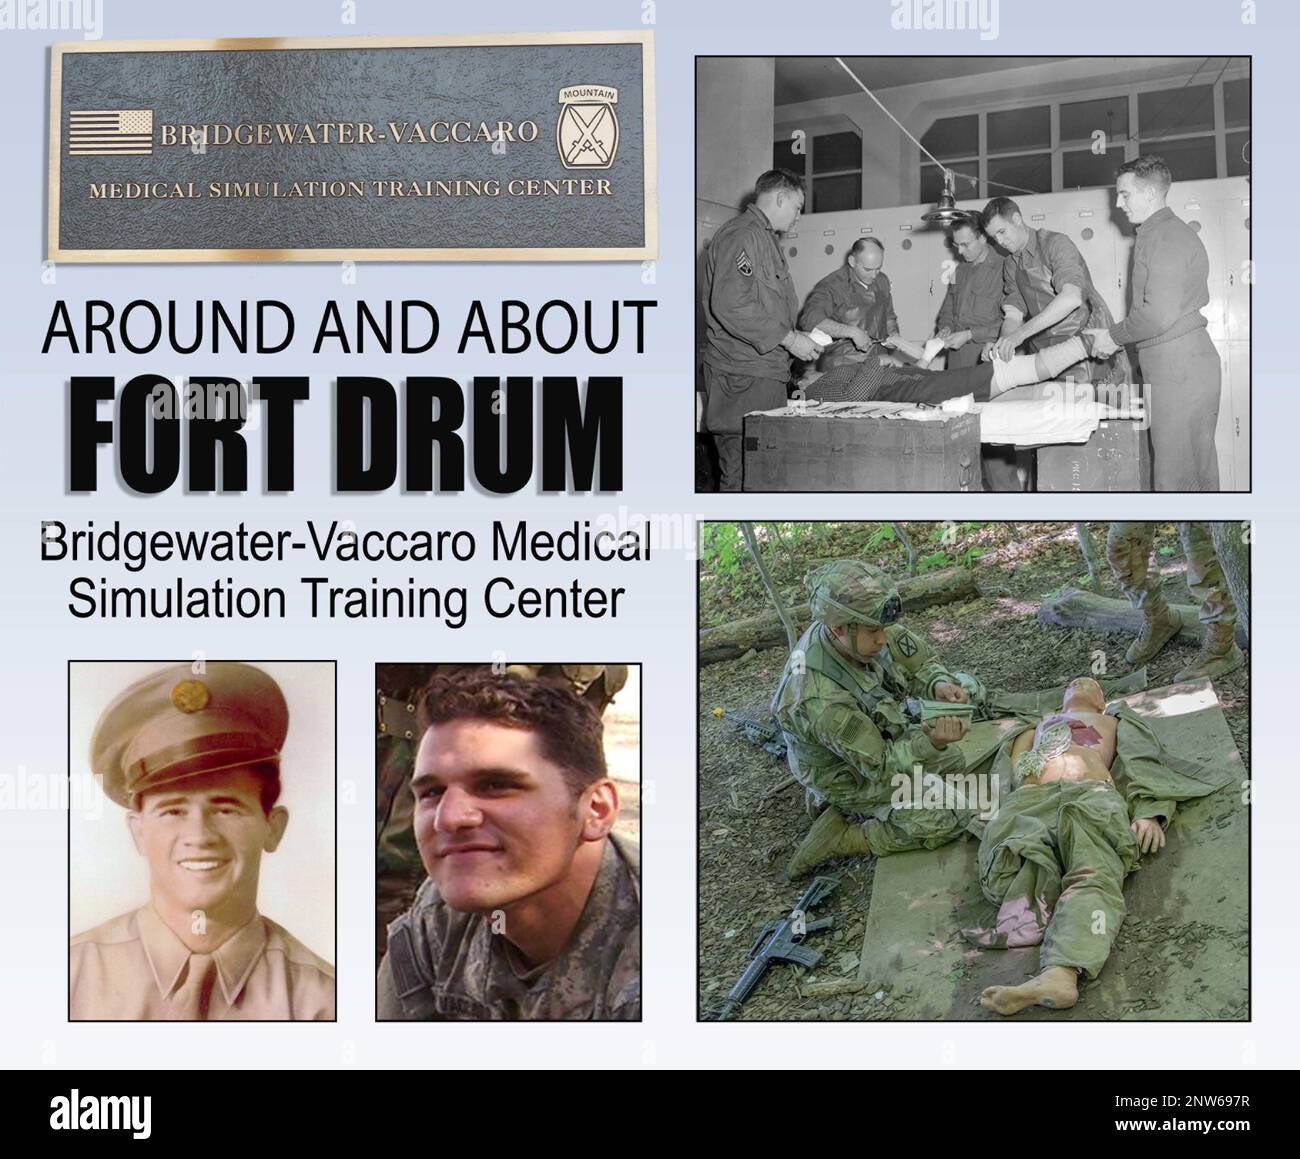 The Bridgewater-Vaccaro Medical Simulation Training Center at Fort Drum was dedicated in June 2007, to honor two combat medics who served in battle more than 60 years apart but shared a bond of selfless service and sacrifice. (Graphic by Mike Strasser, Fort Drum Garrison Public Affairs) Stock Photo